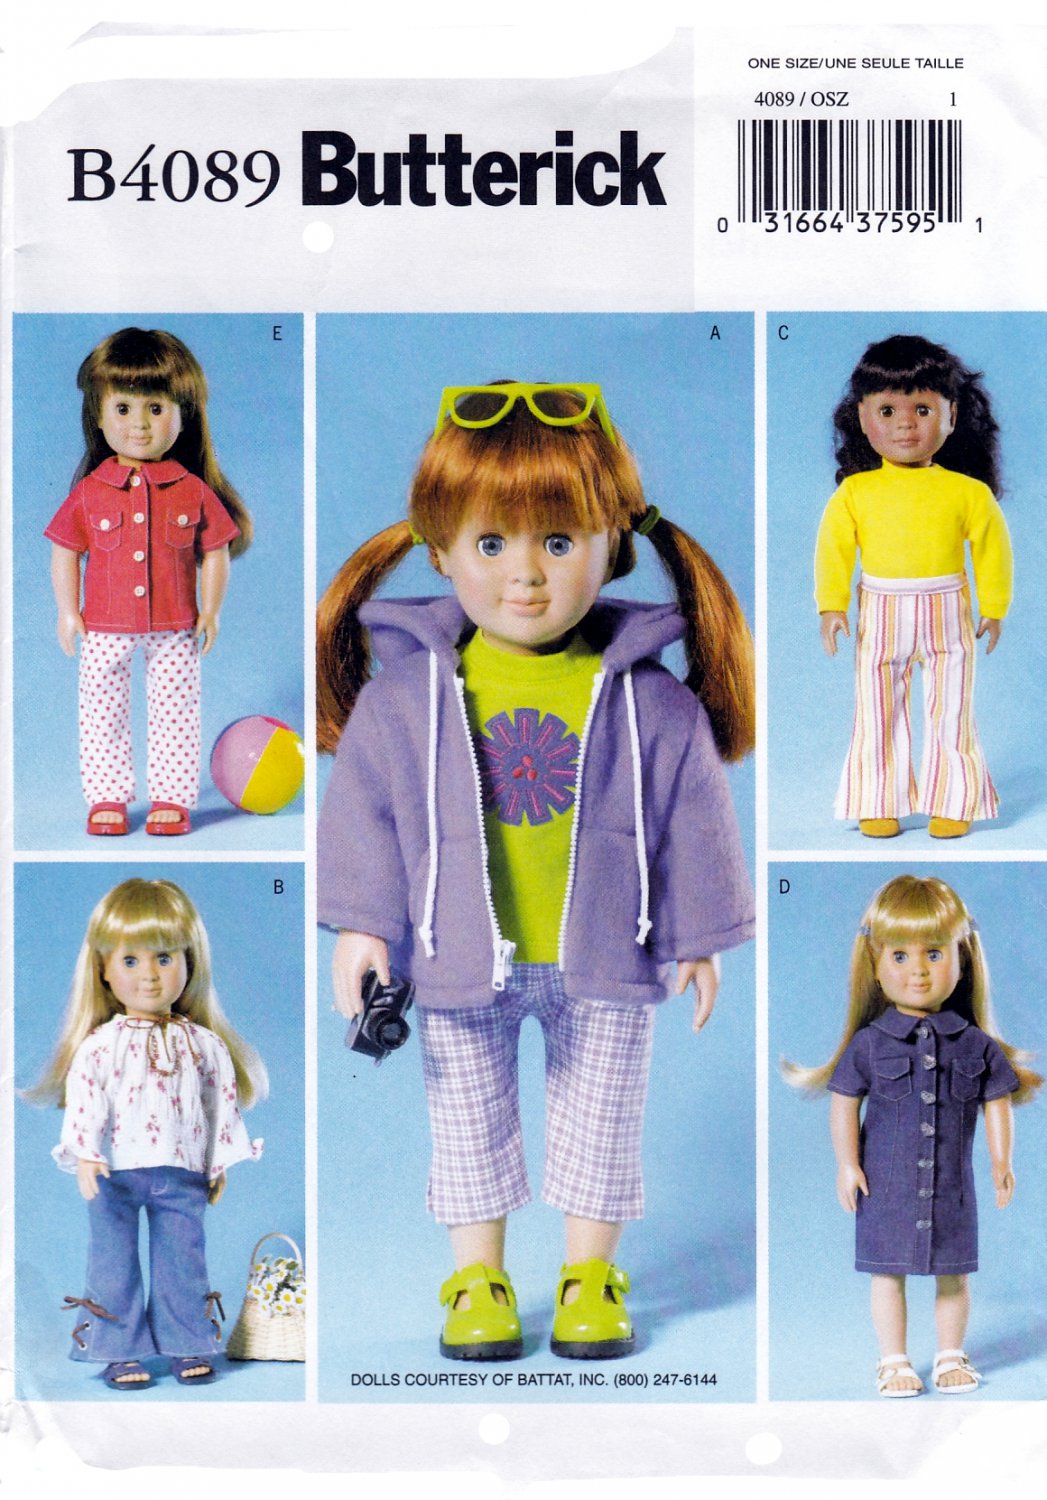 Butterick B4089 Doll Clothes for 18" Doll Casual and Sport Styles Sewing Pattern Sizes OSZ